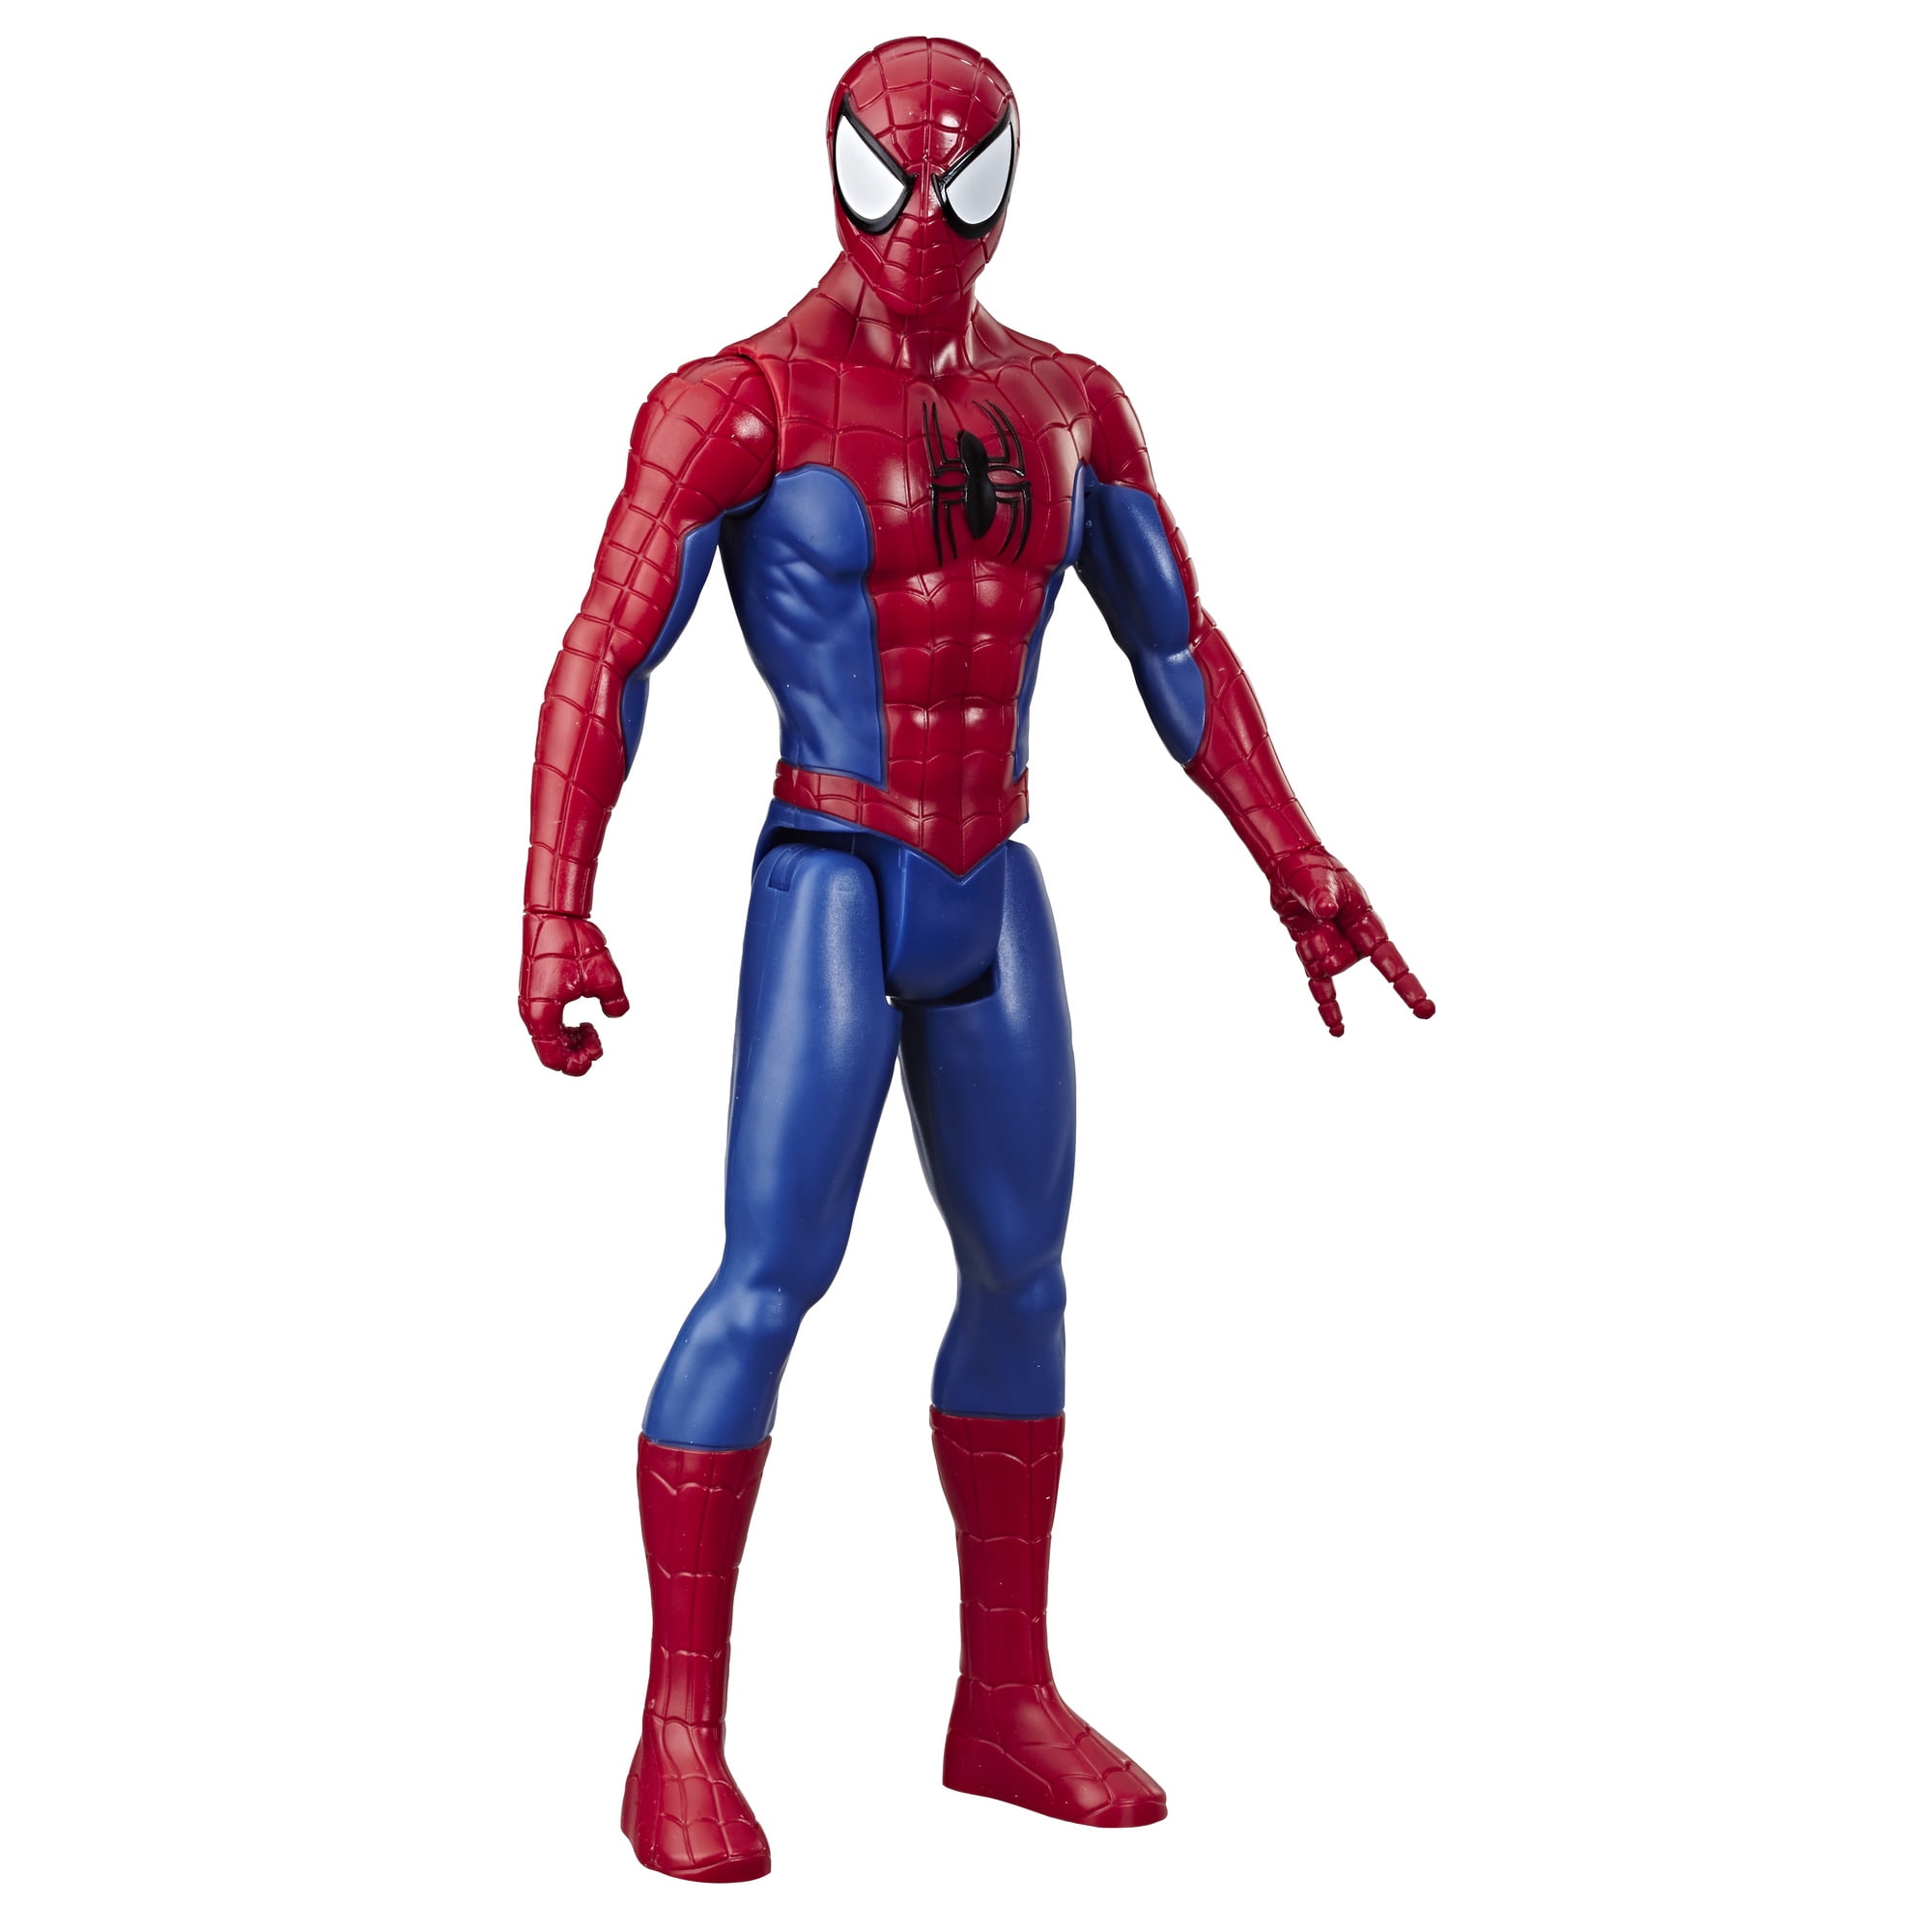 12 Inch Spider Man Action Figure Avengers Titan Hero Series Character Play Toy 